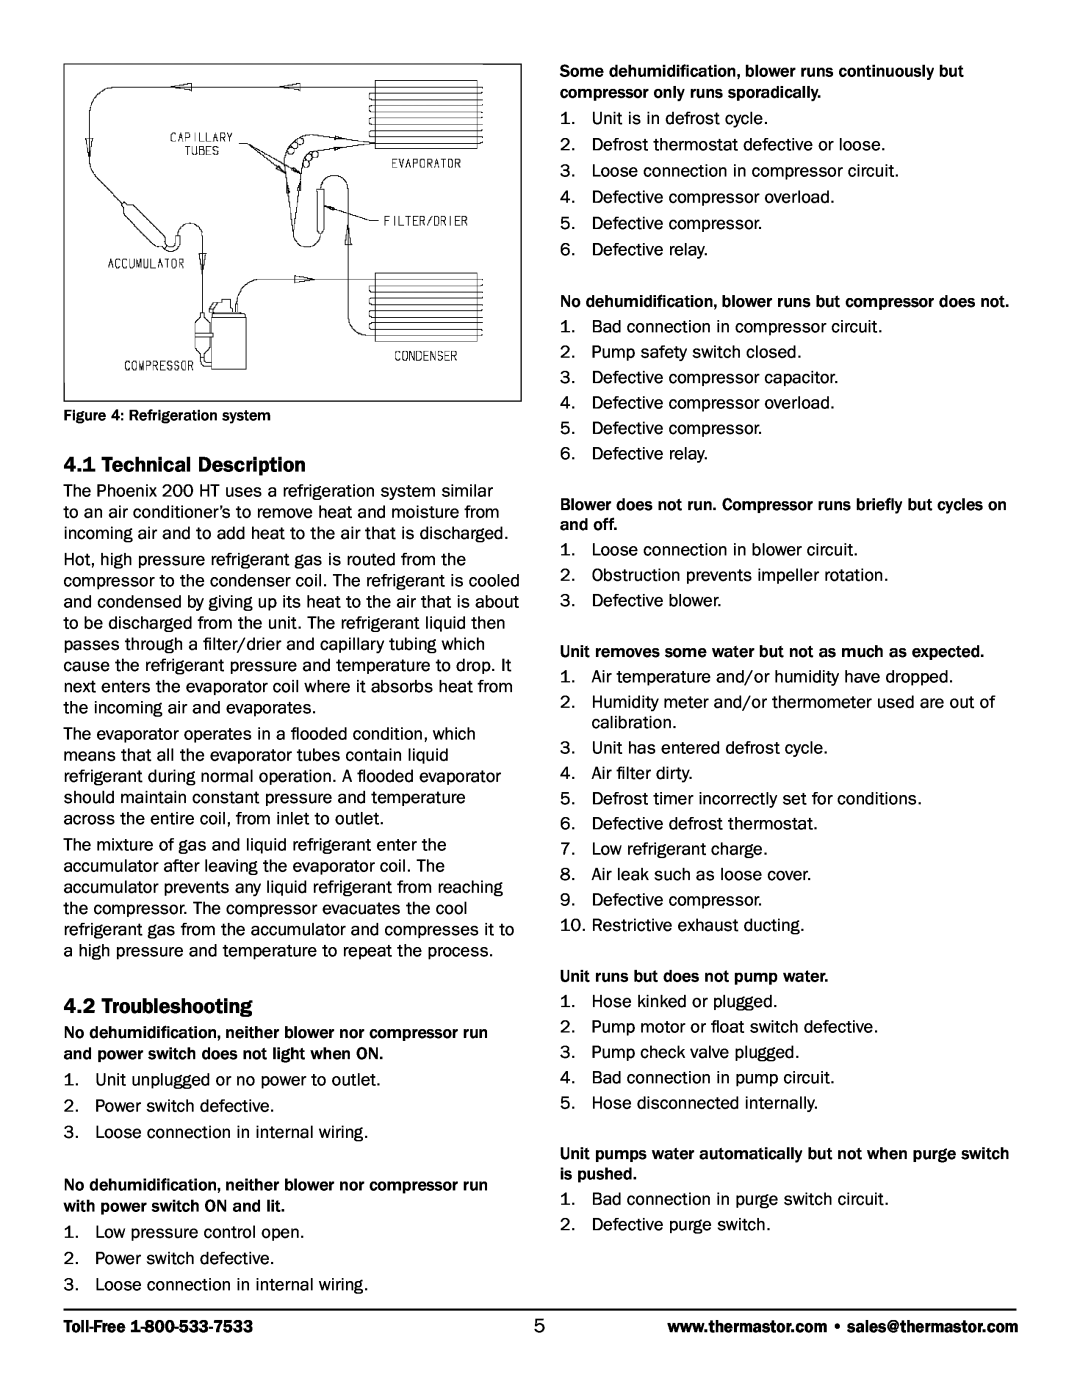 Therma-Stor Products Group Phoenix 200 HT owner manual Technical Description, Troubleshooting 